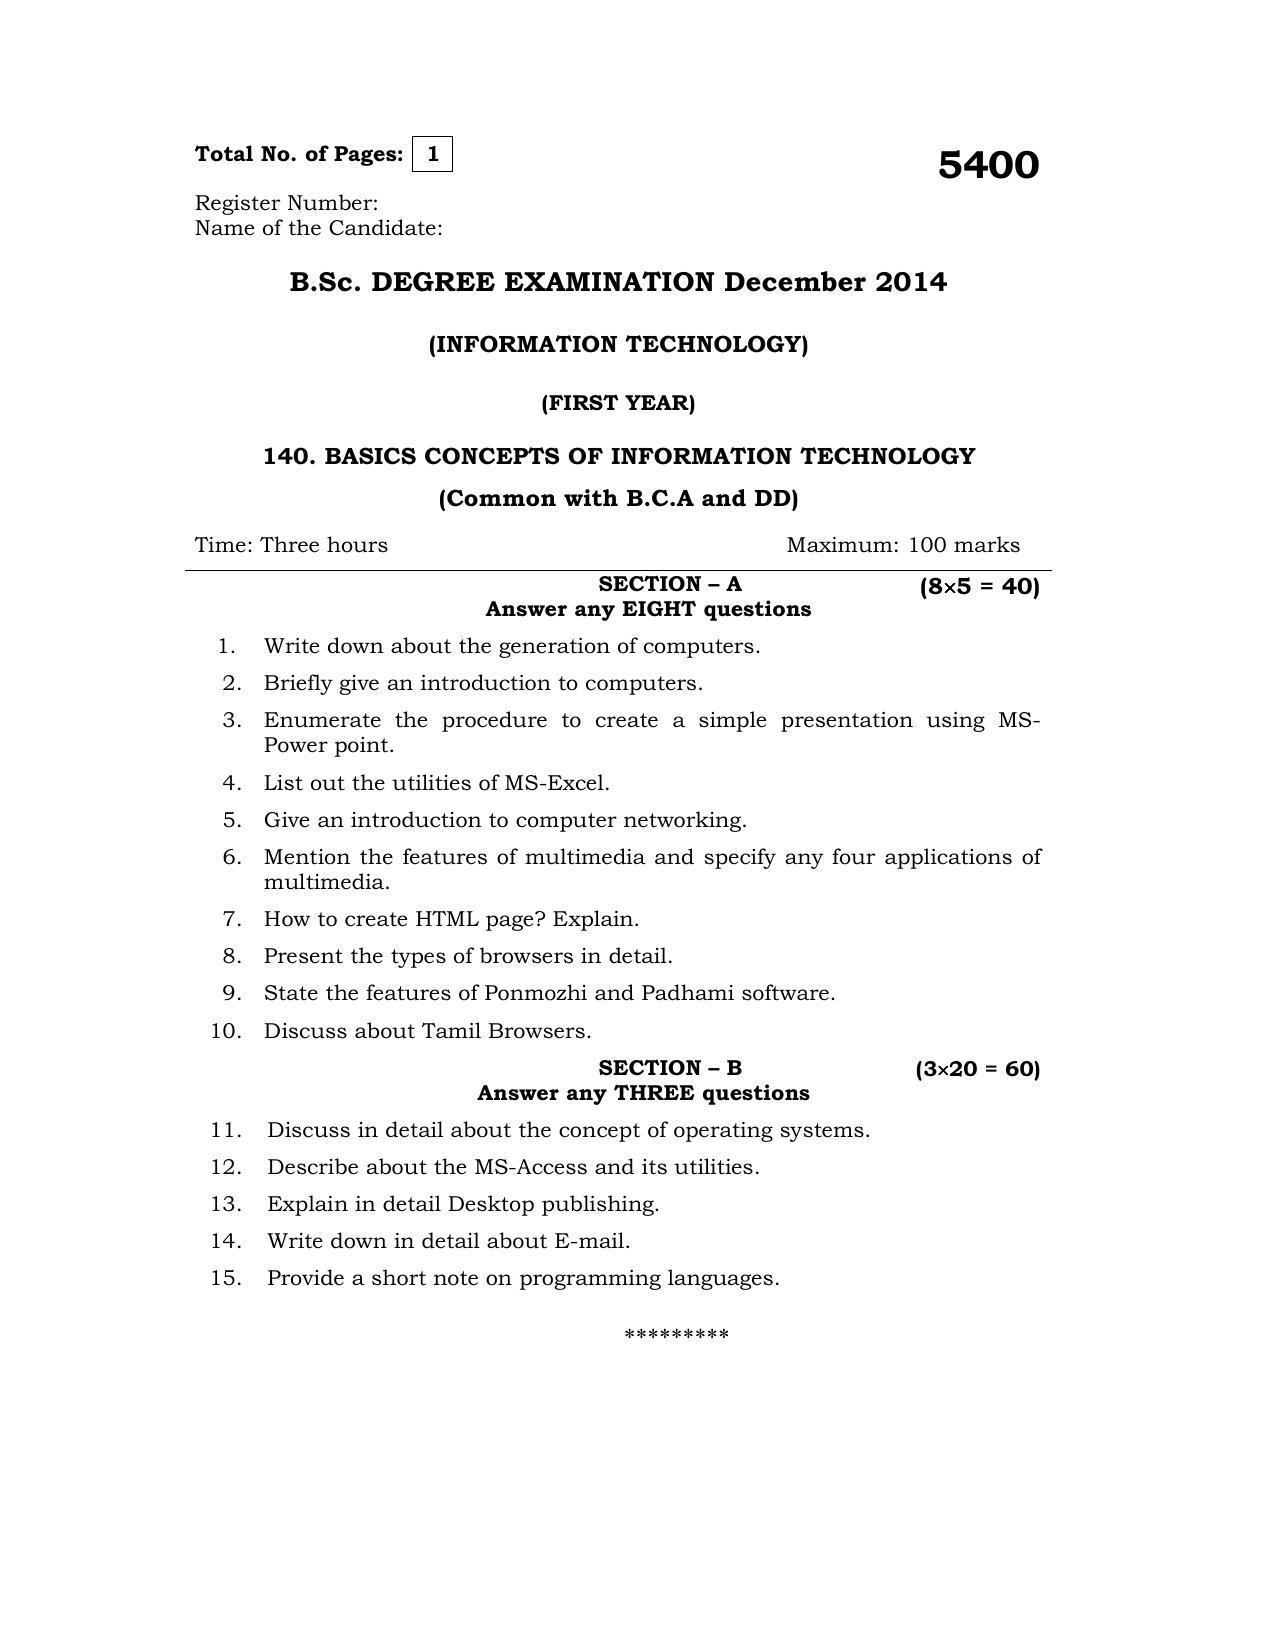 Annamalai University Basics/Concenpts Of Information Technology B.C.A. (OUS) December 2014 Question Papers - Page 1